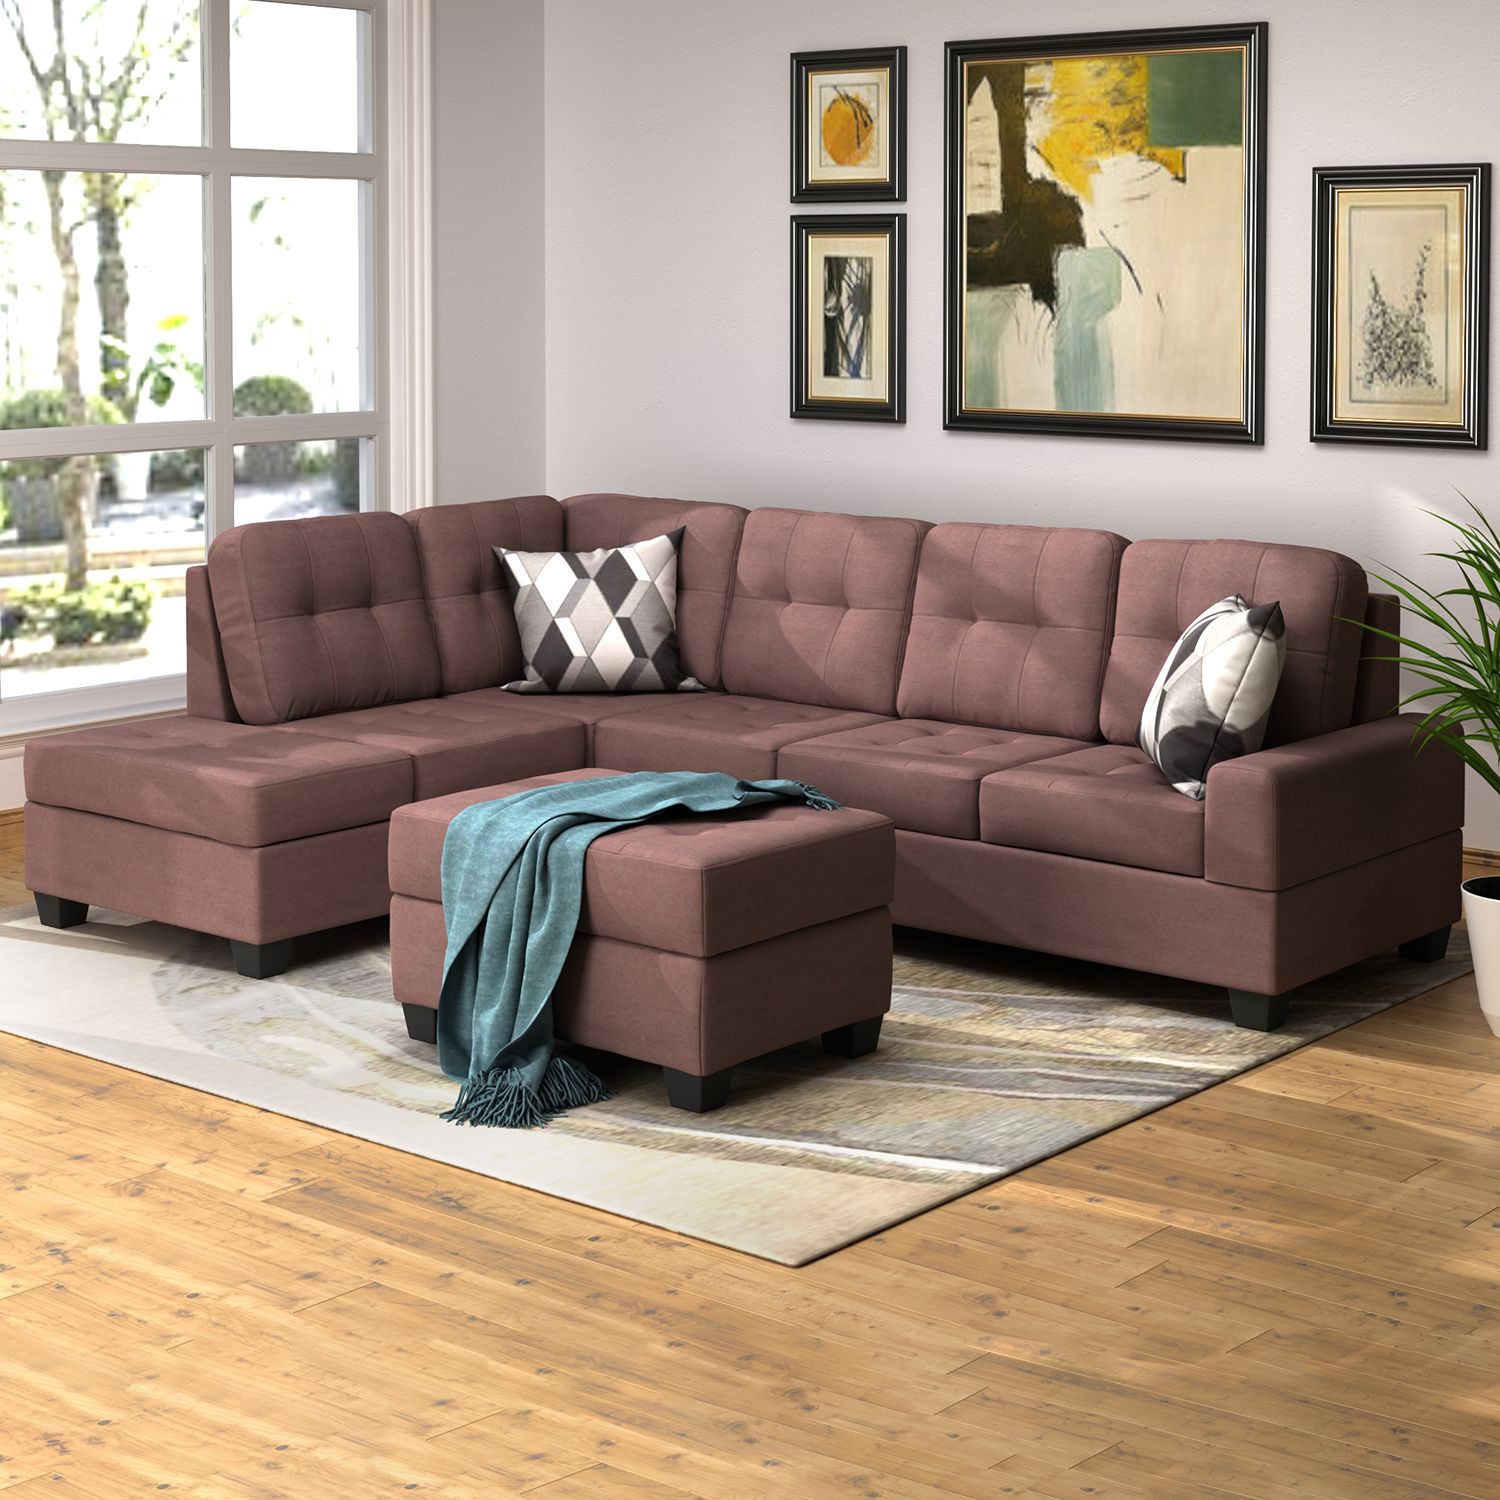 3 Piece Sectional Sofa Microfiber With Reversible Chaise Regarding 3Pc Miles Leather Sectional Sofas With Chaise (View 4 of 15)